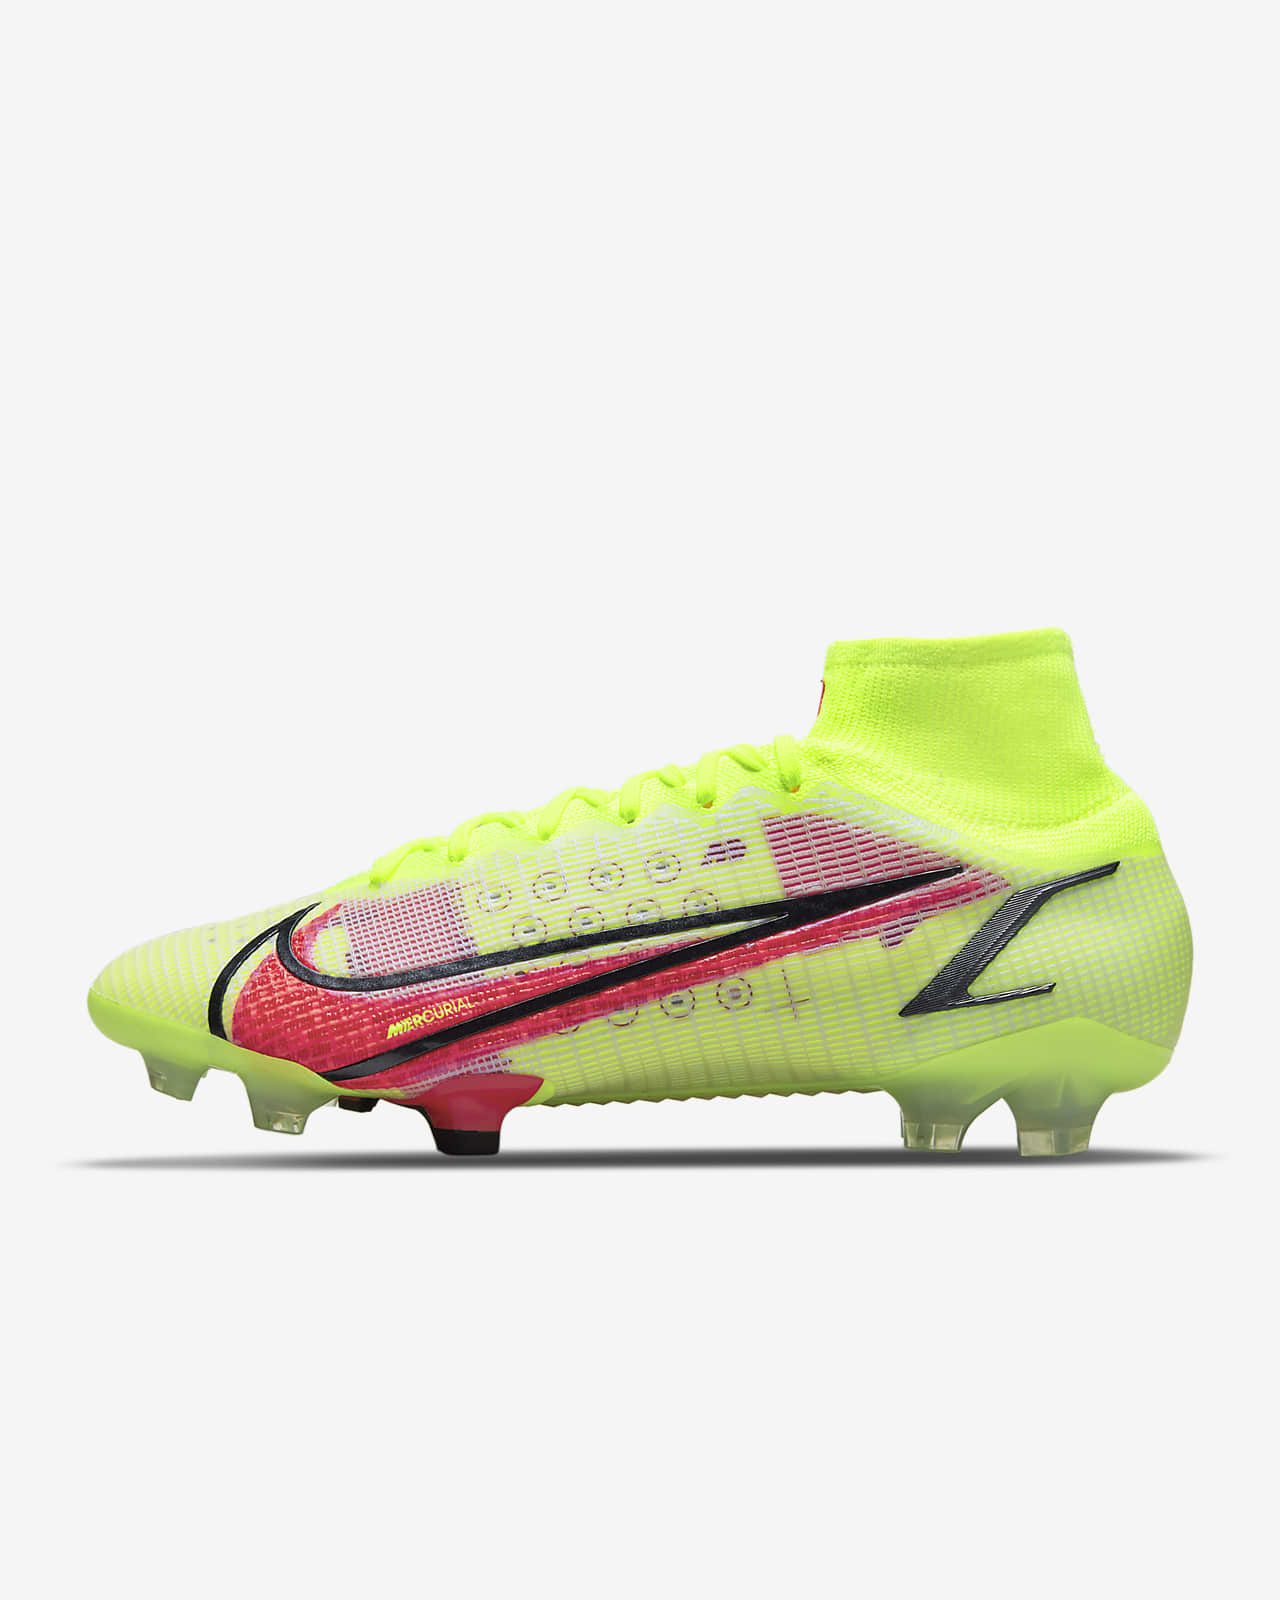 nike soccer cleats price